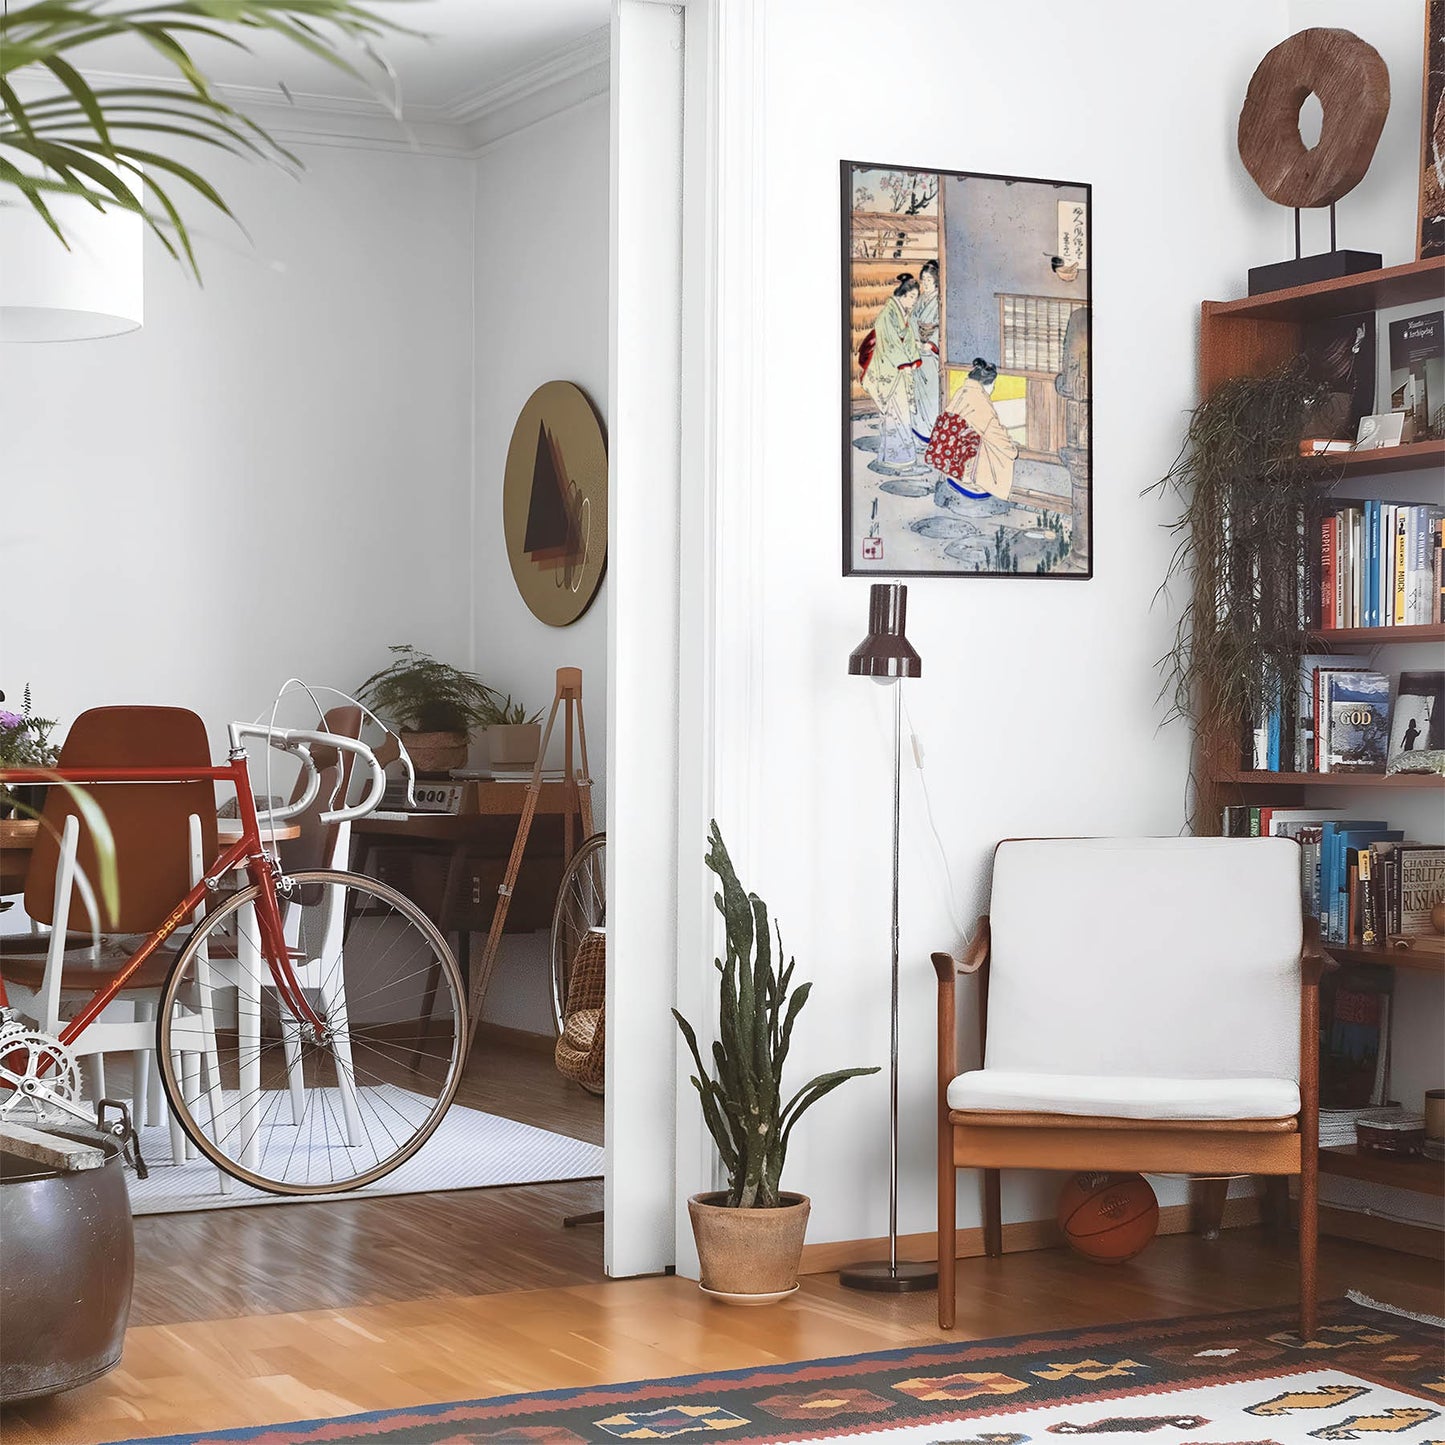 Eclectic living room with a road bike, bookshelf and house plants that features framed artwork of a Light and Minimalist Woodblock above a chair and lamp